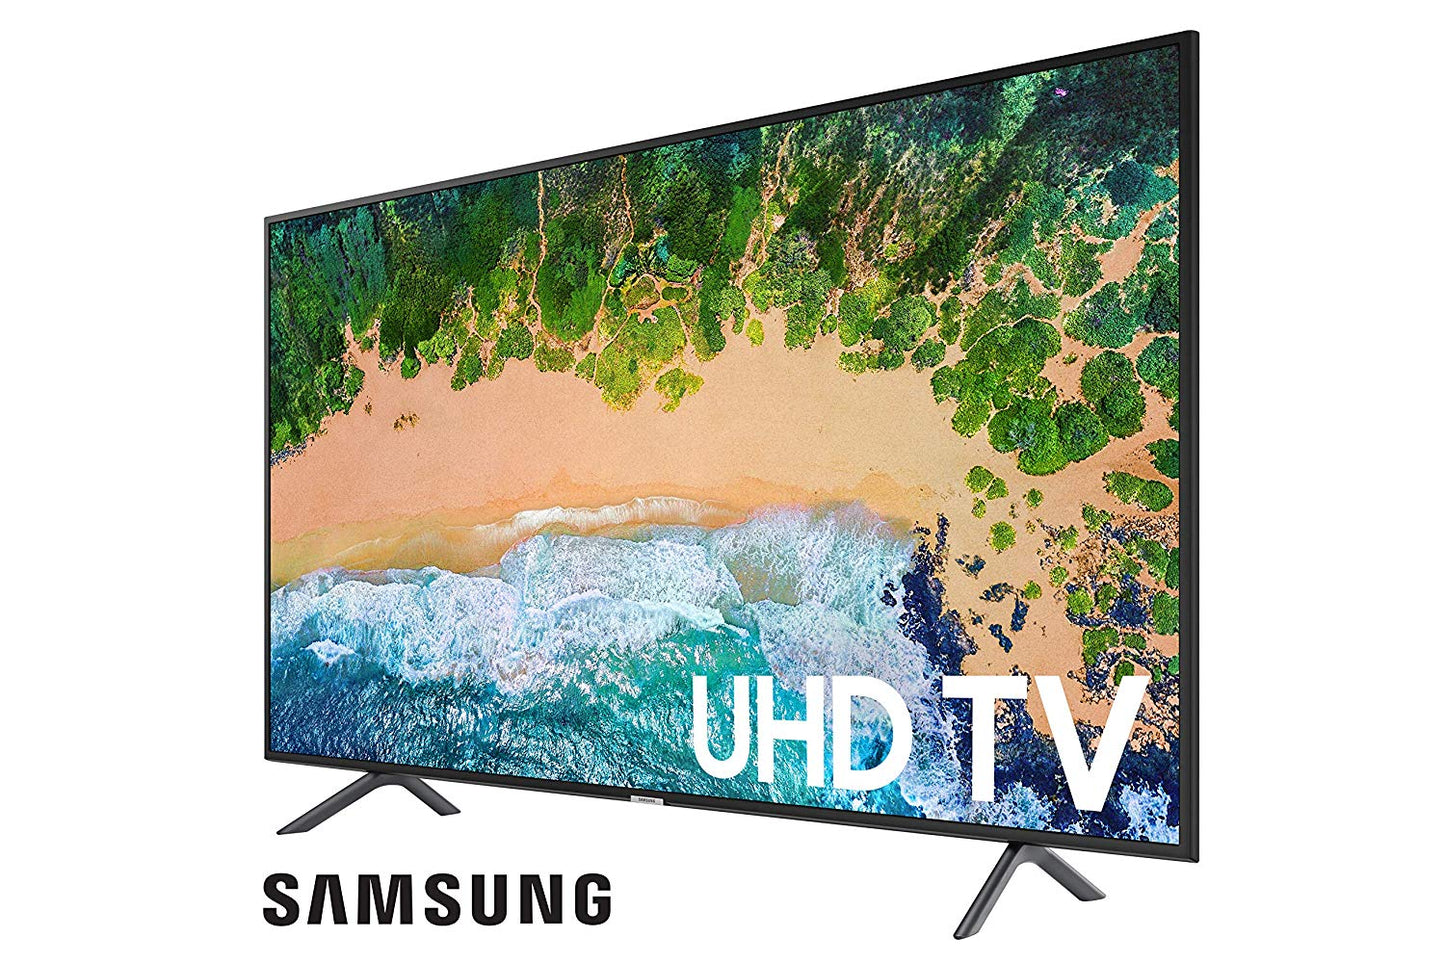 Samsung UN65NU6900 65-in HDR UHD Smart LED TV - 2018